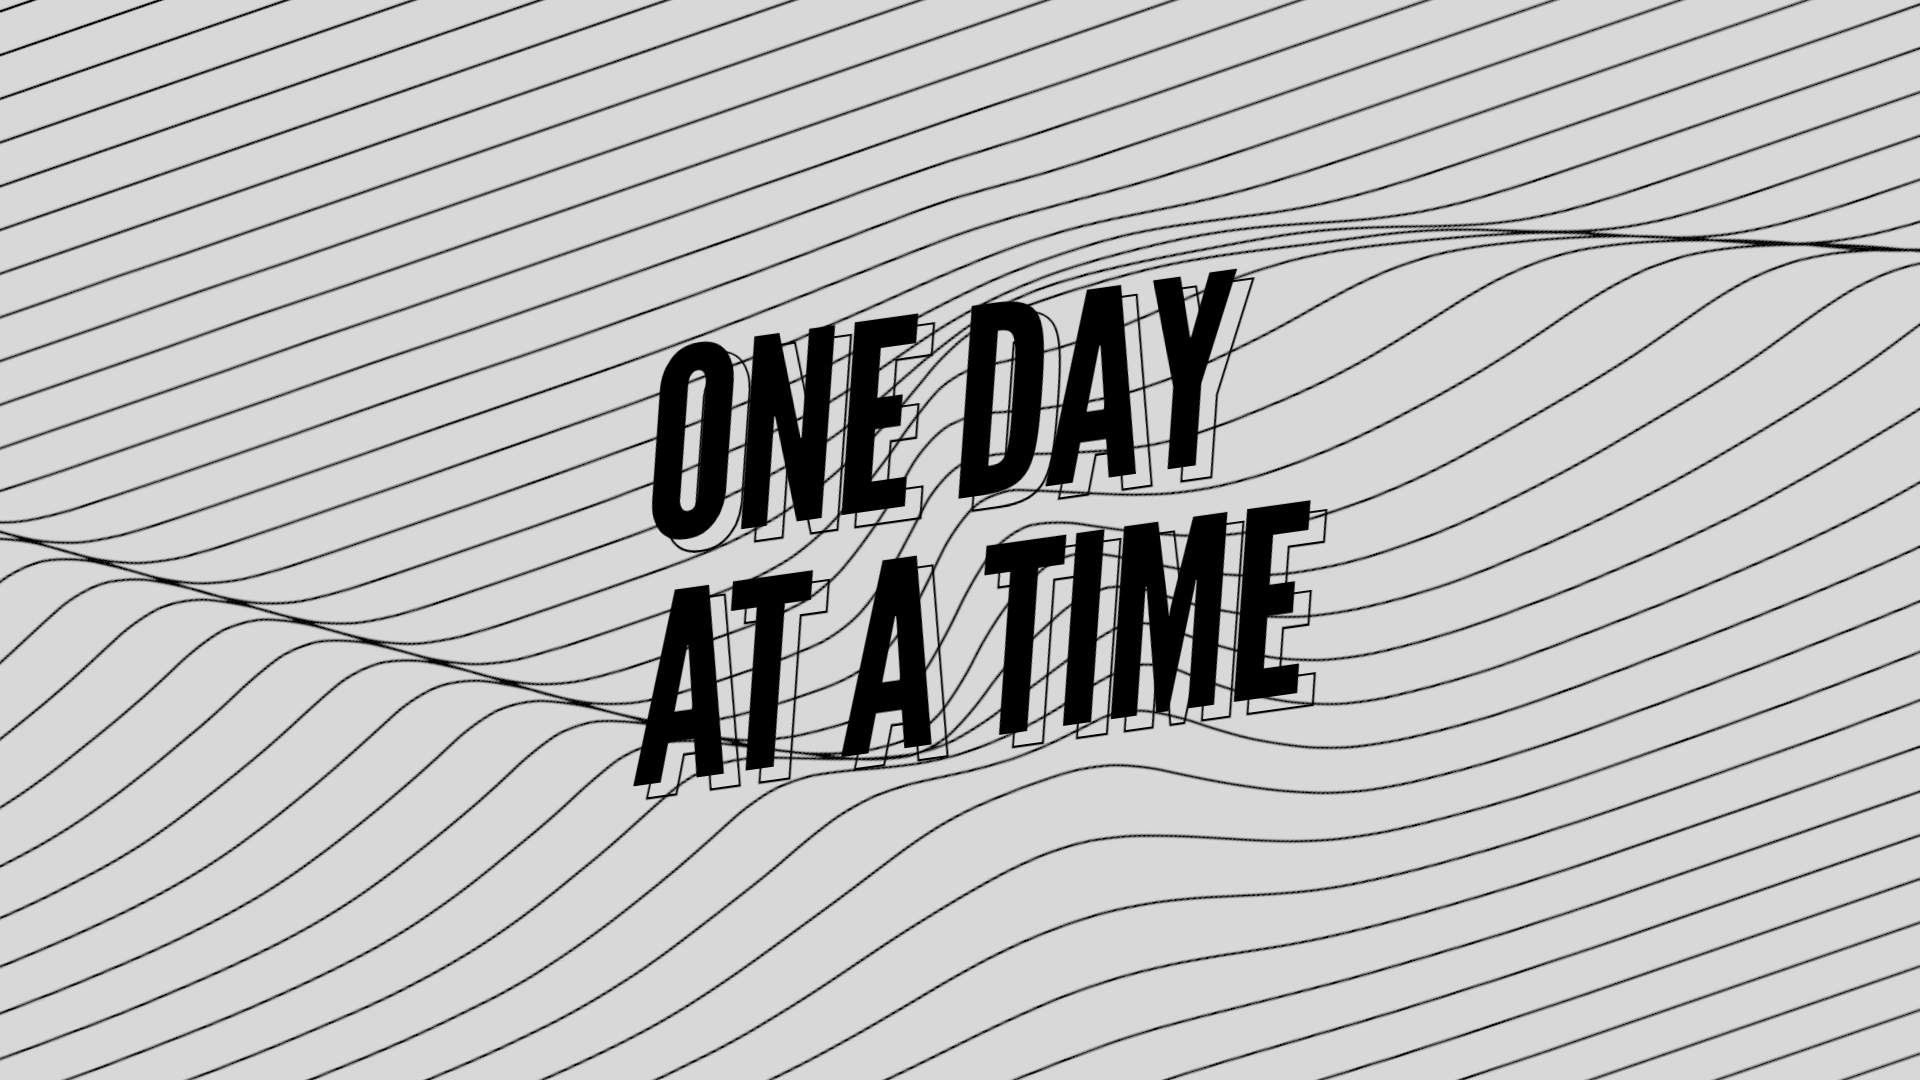 One Day at a Time Pt. 2